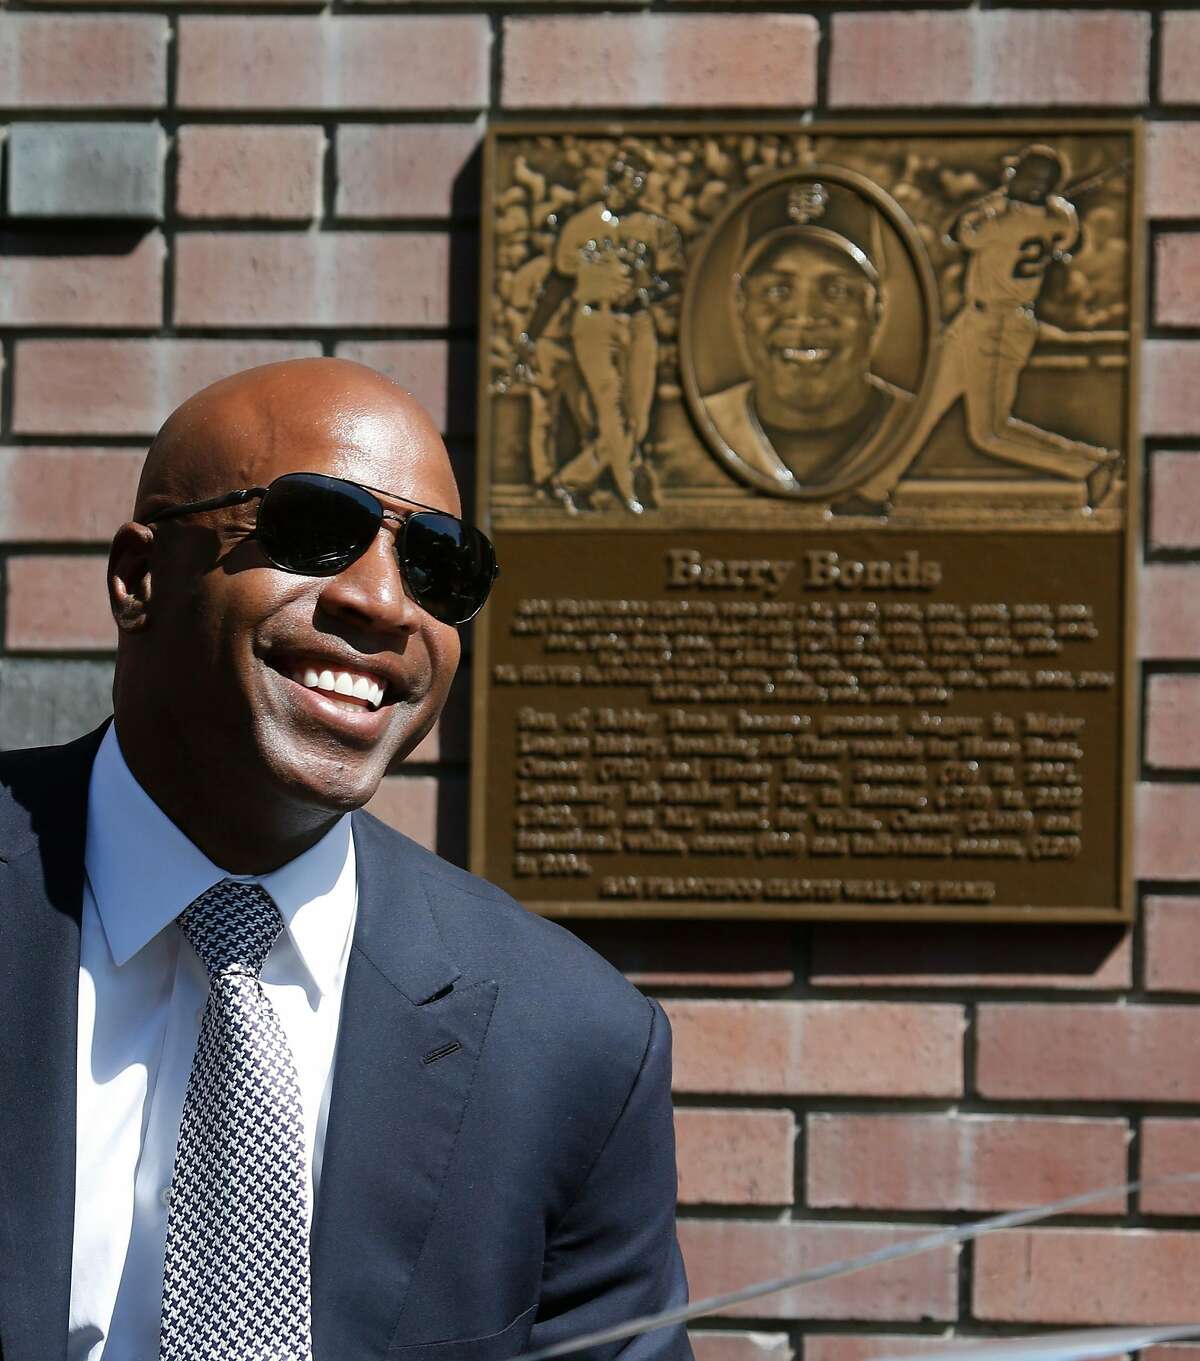 Barry Bonds smiles at fans after a plaque is unveiled during a ceremony to enshrine the retired slugger on the Giants' Wall of Fame on King Street outside of AT&T Park in San Francisco, Calif. on Saturday, July 8, 2017.